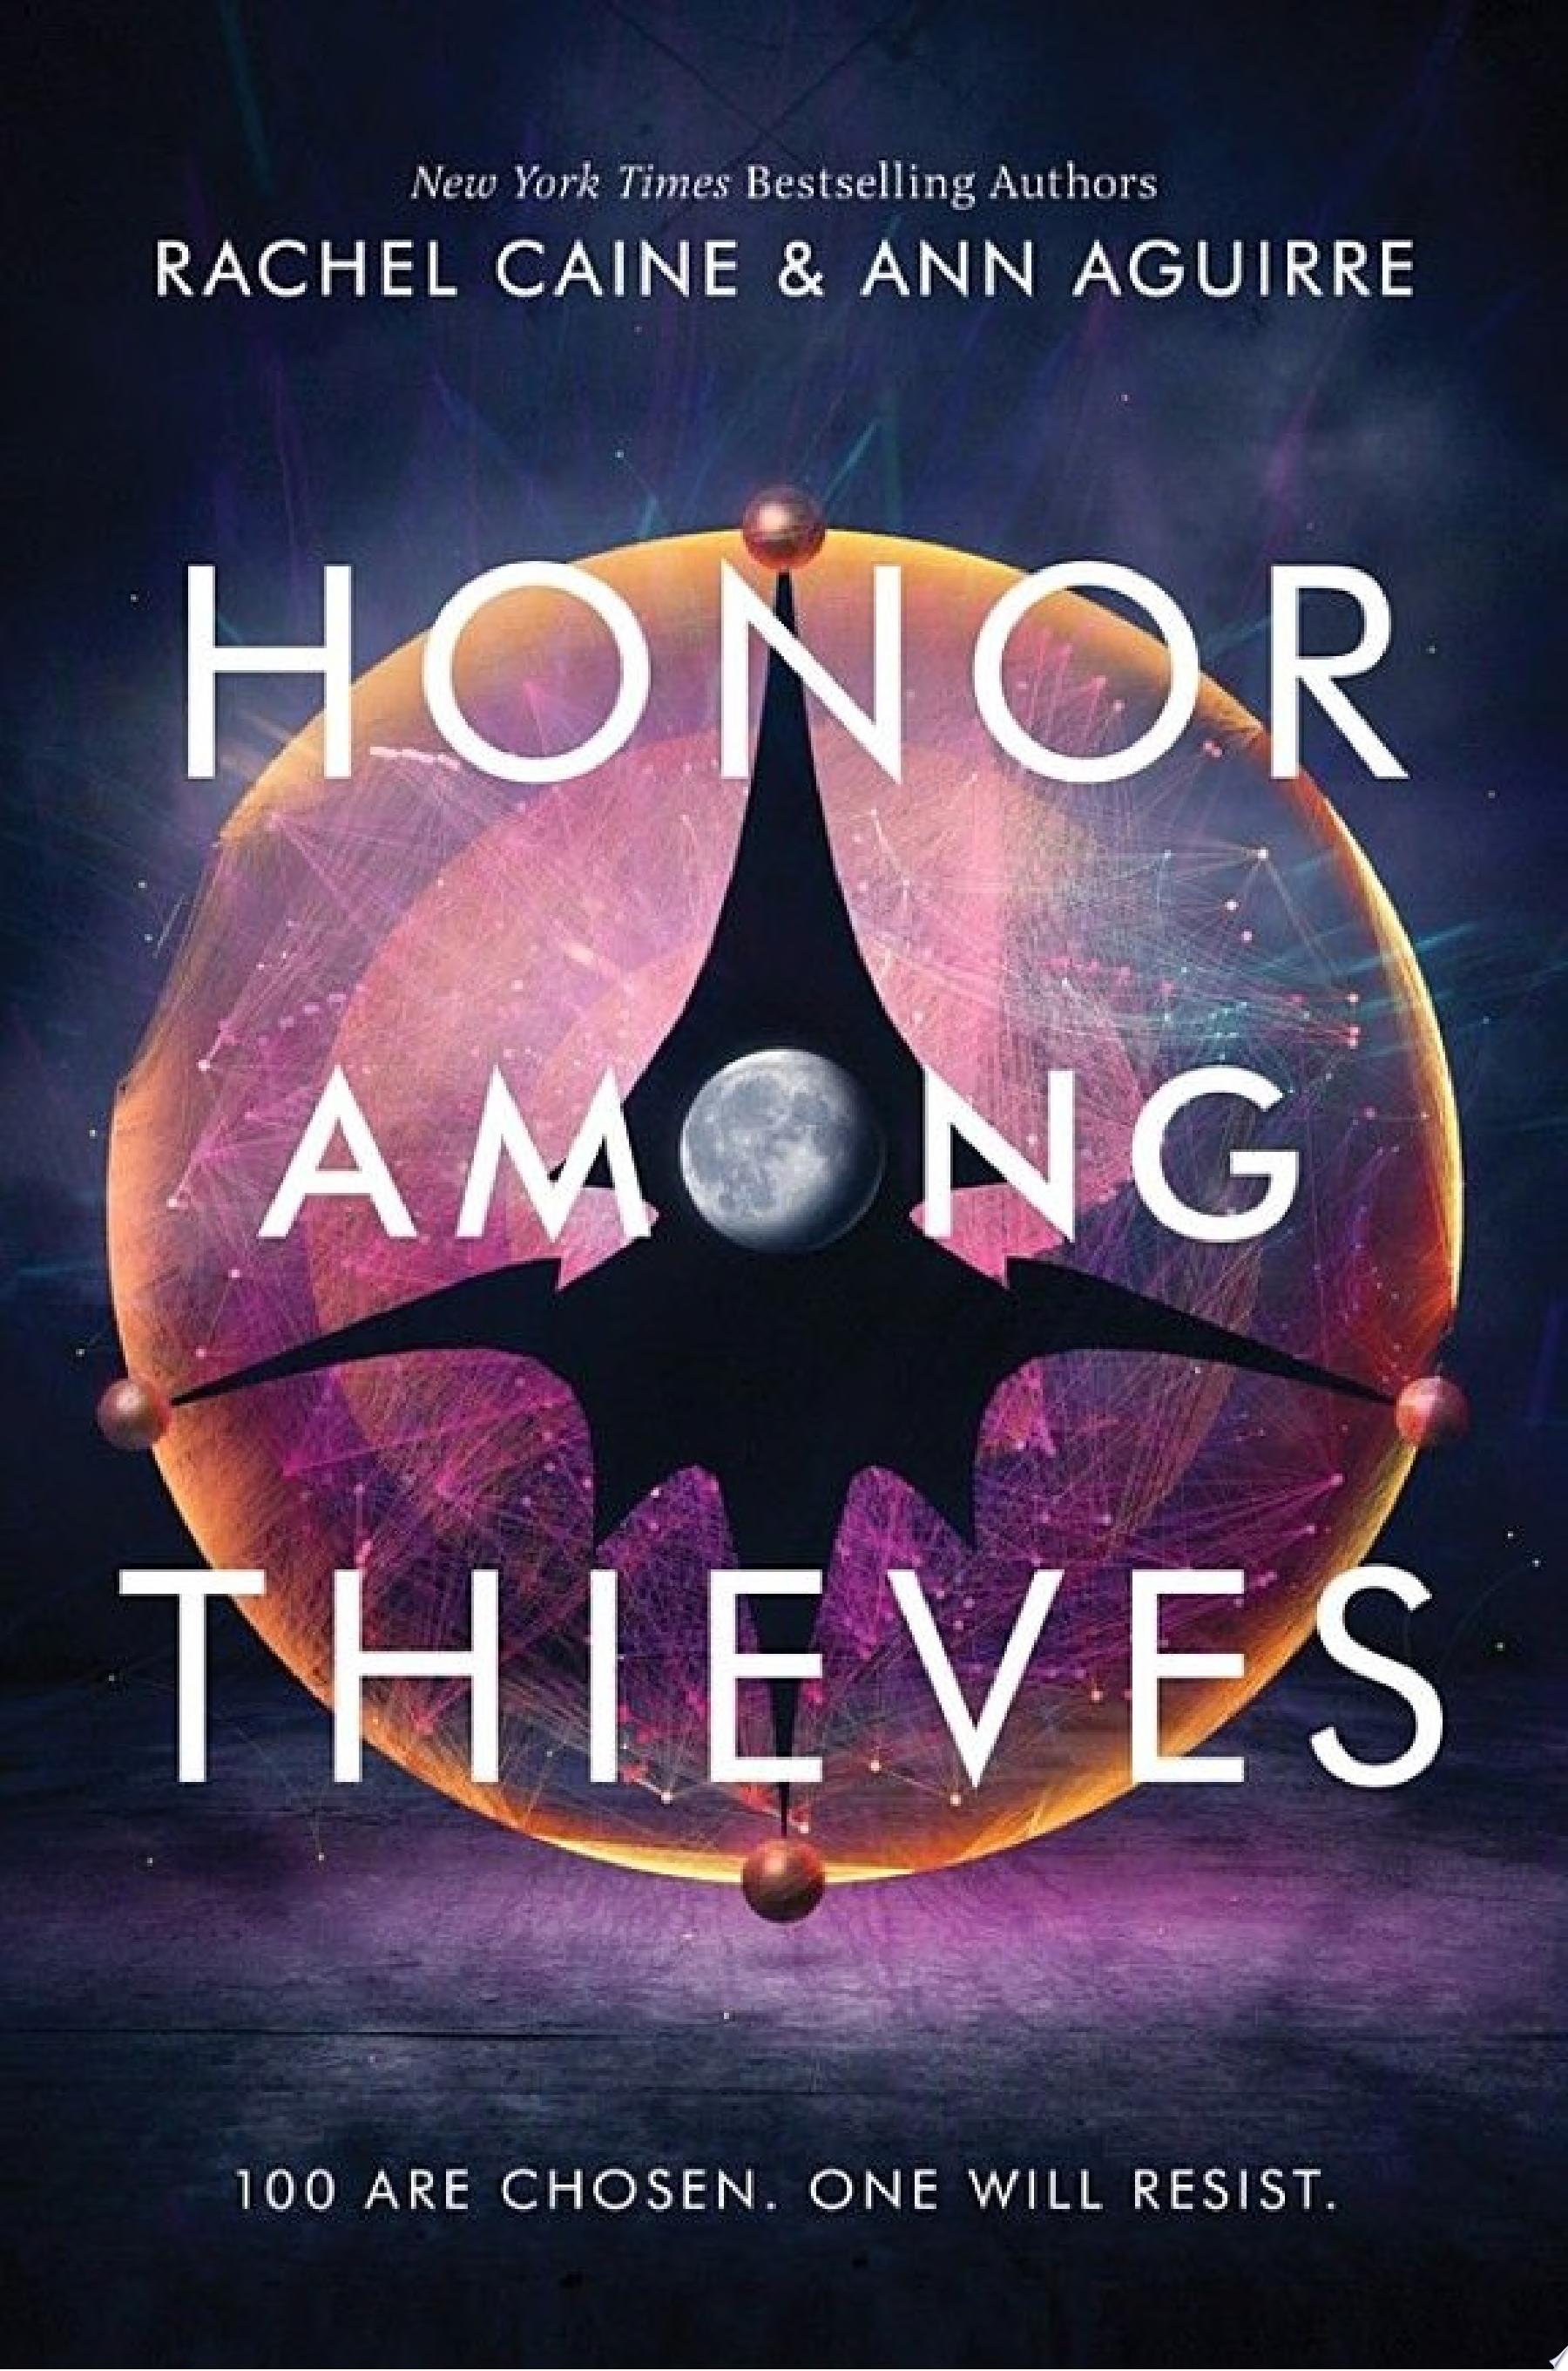 Image for "Honor Among Thieves"